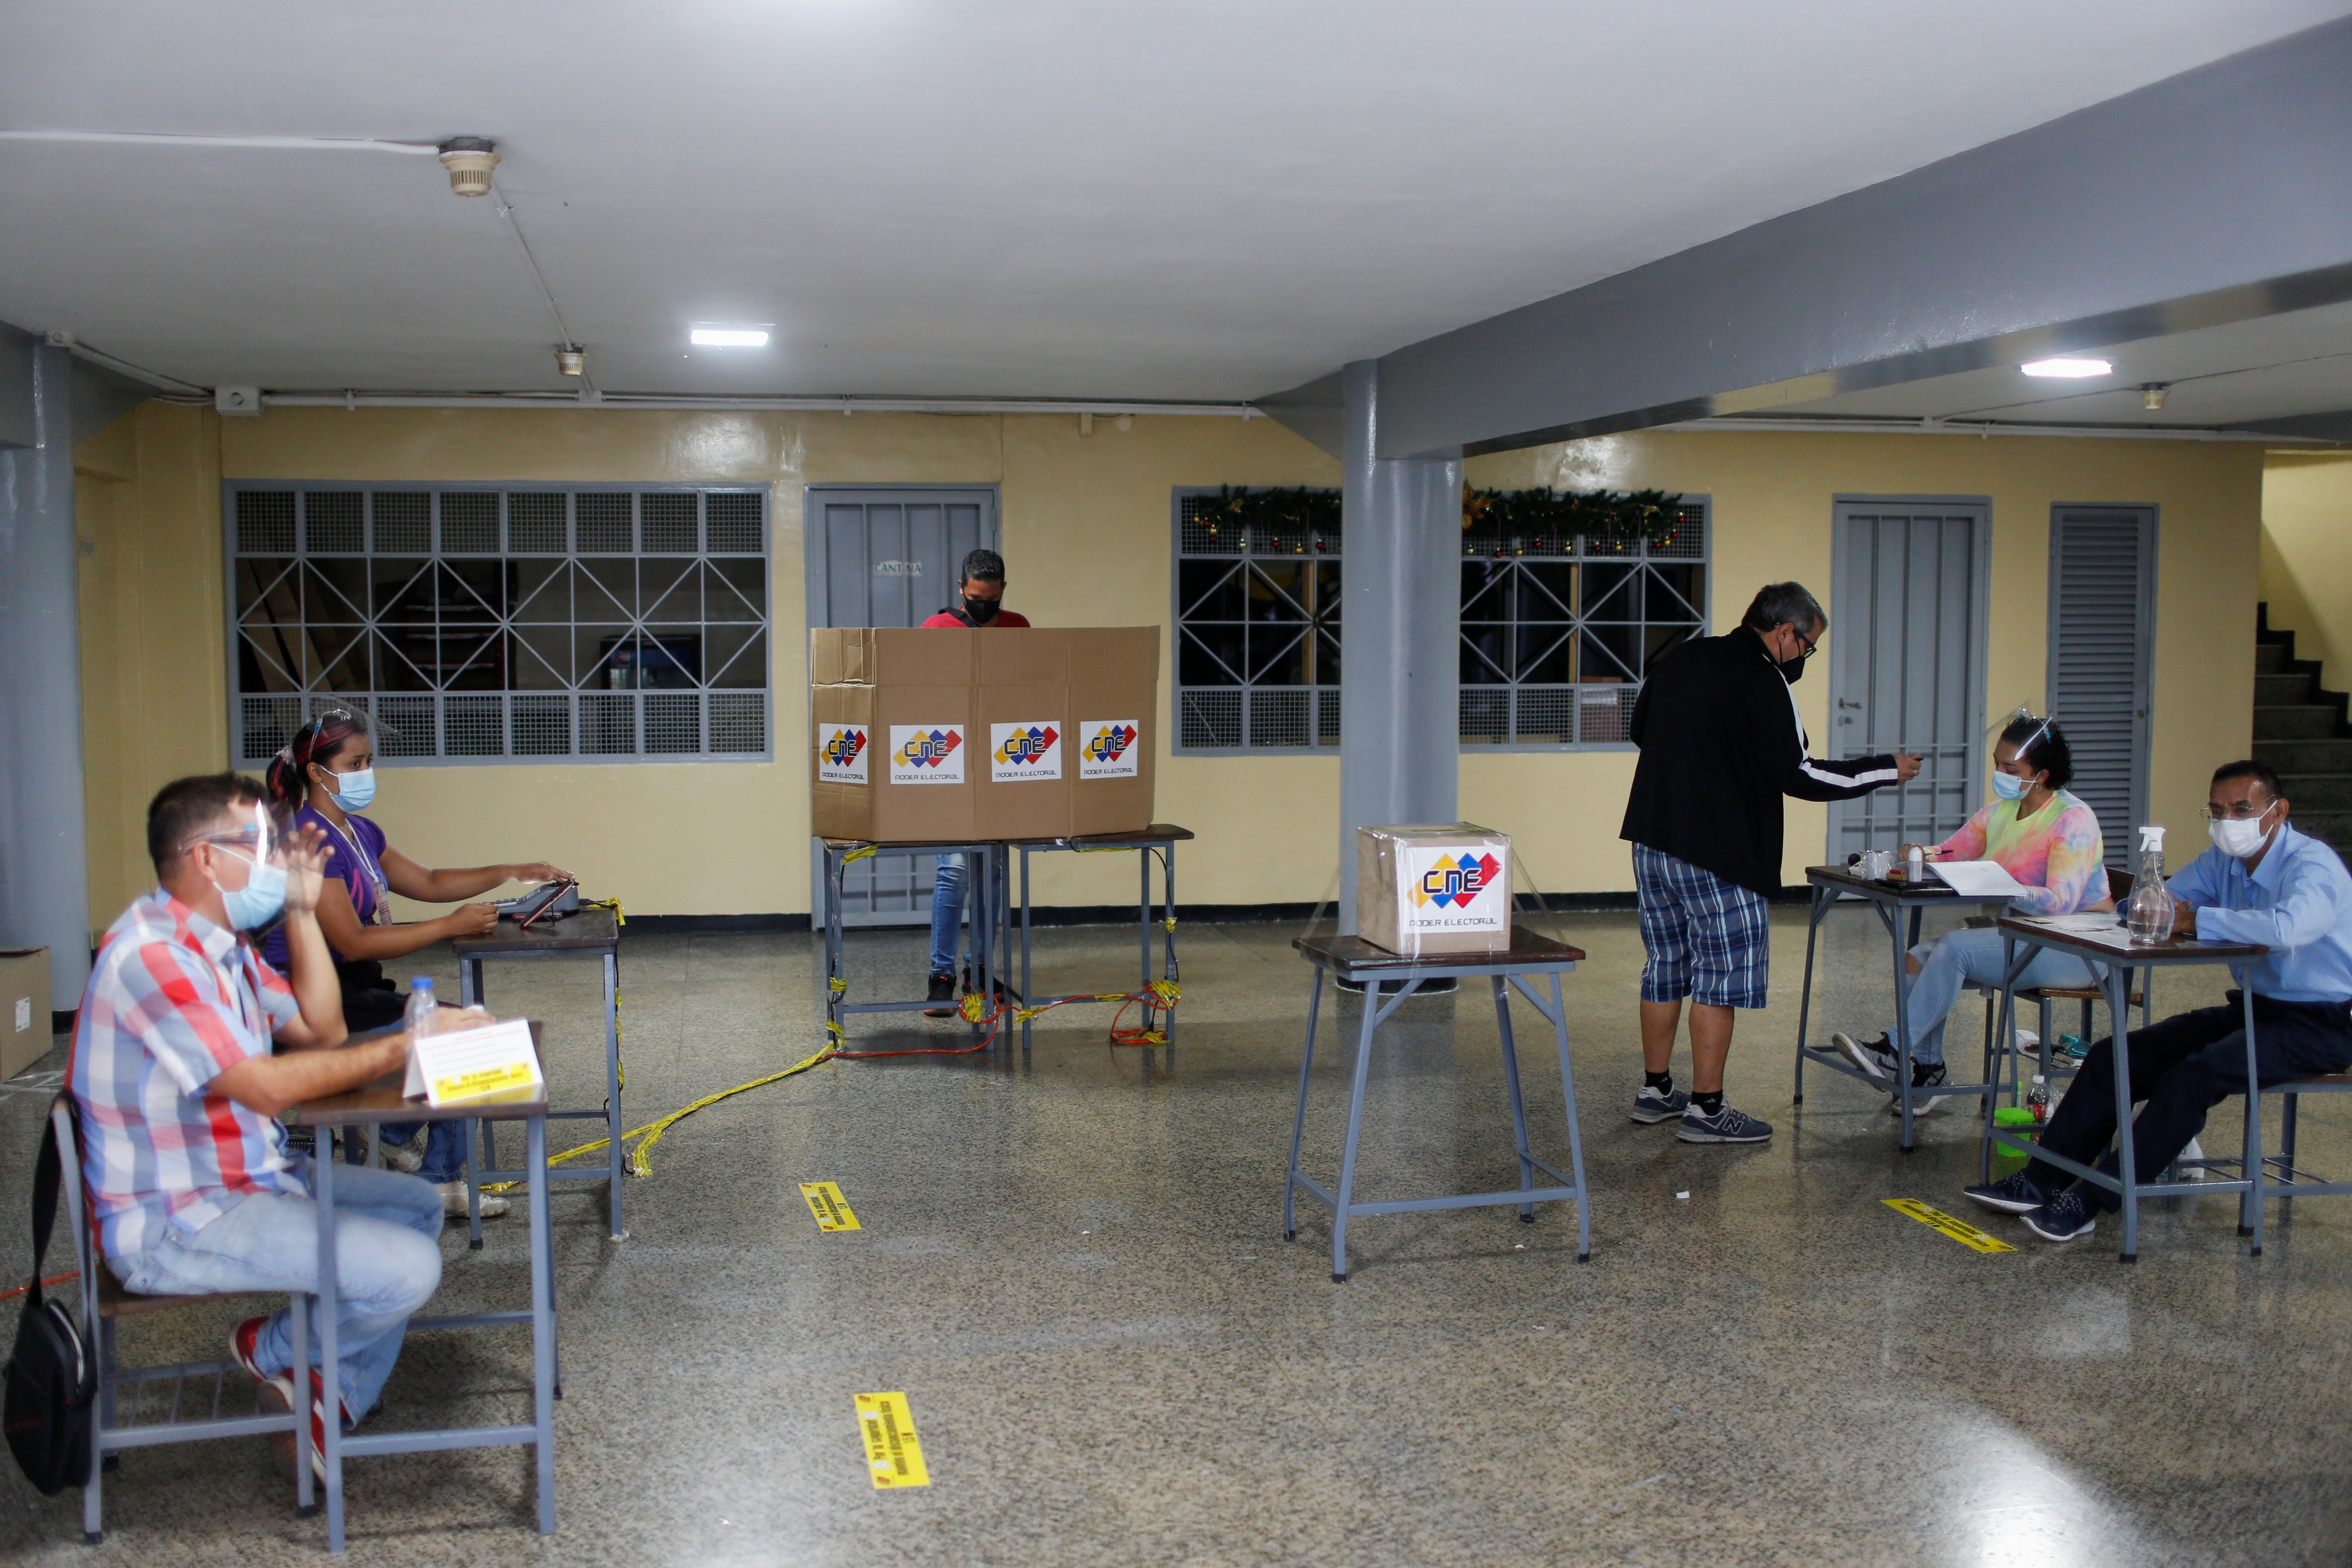 Regional and local elections in Venezuela